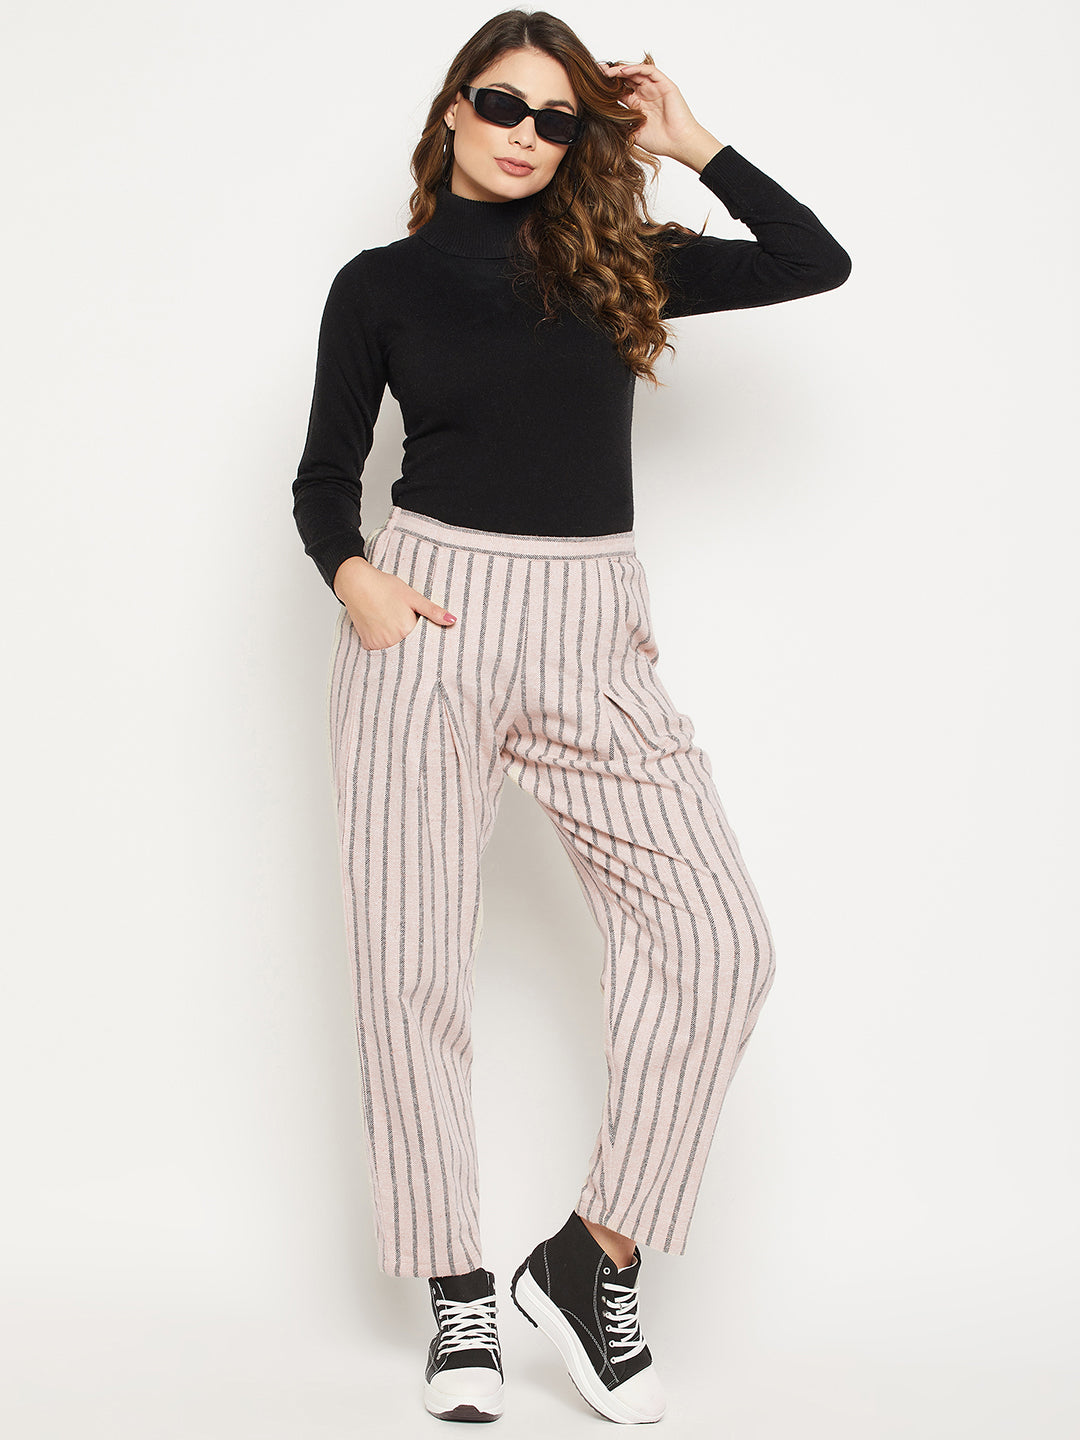 Women Striped Relaxed Flared Wrinkle Free Pleated Cotton Trousers   BITTERLIME